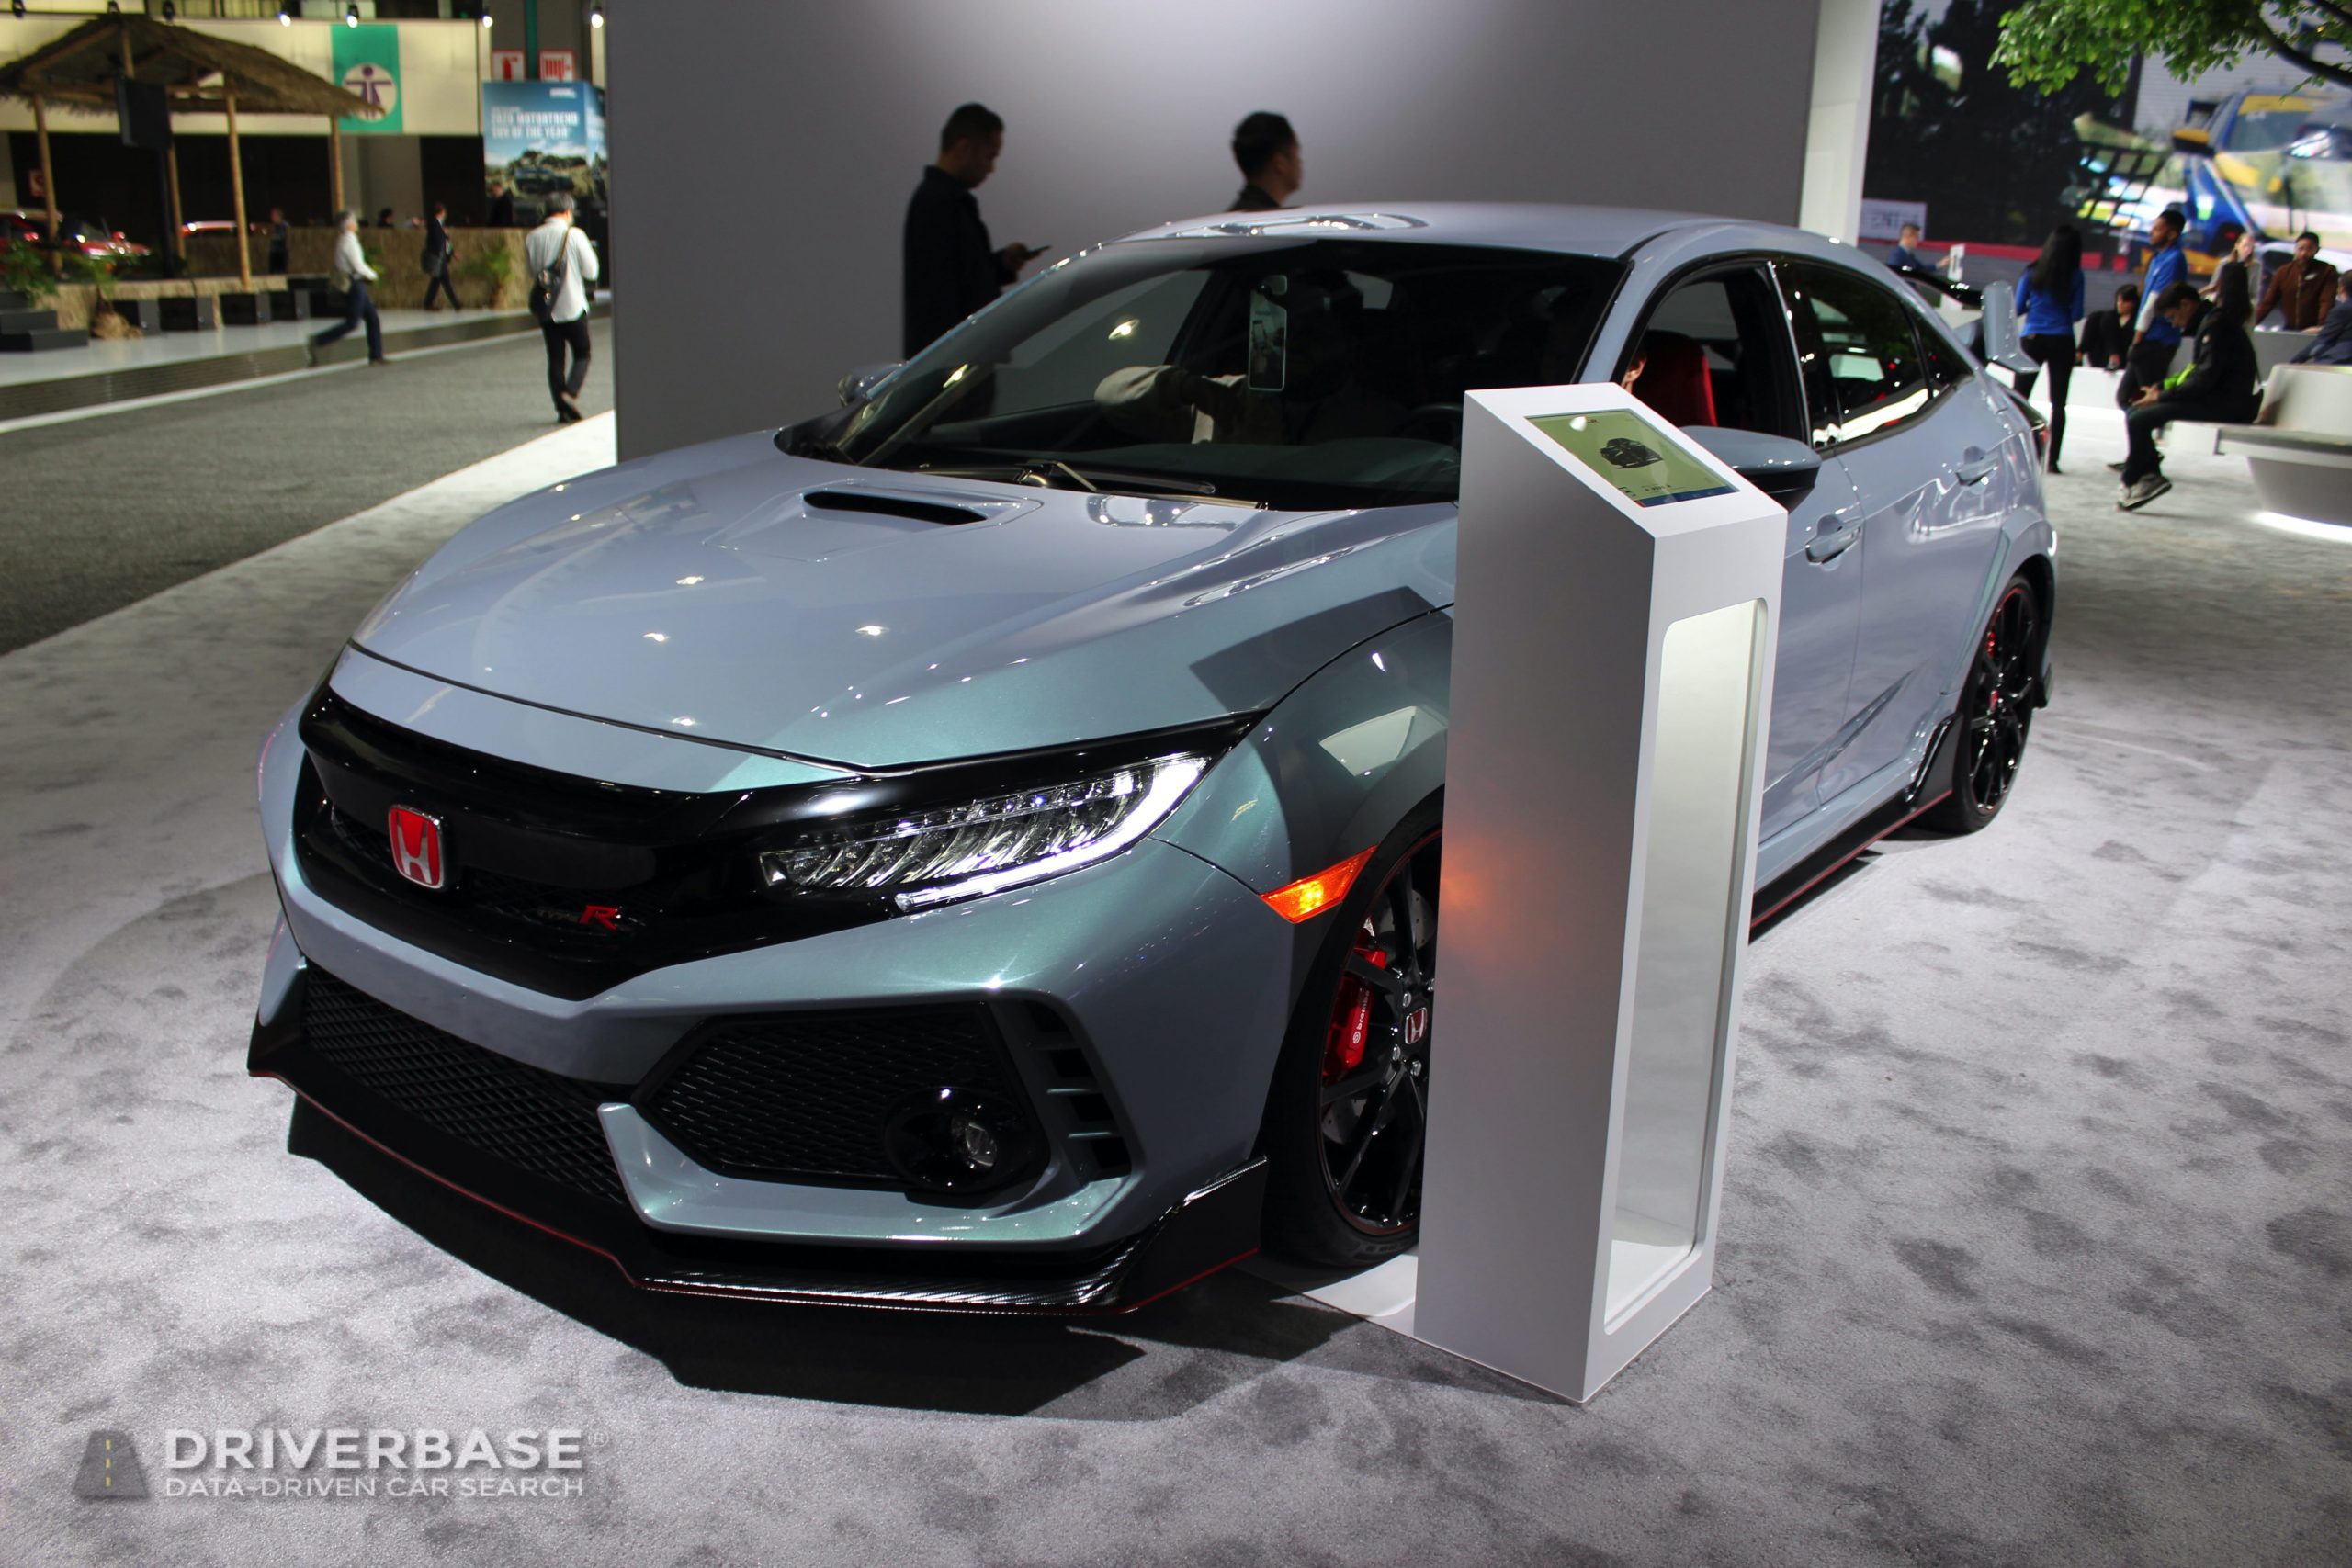 2020 Honda Civic Type R at the 2019 Los Angeles Auto Show